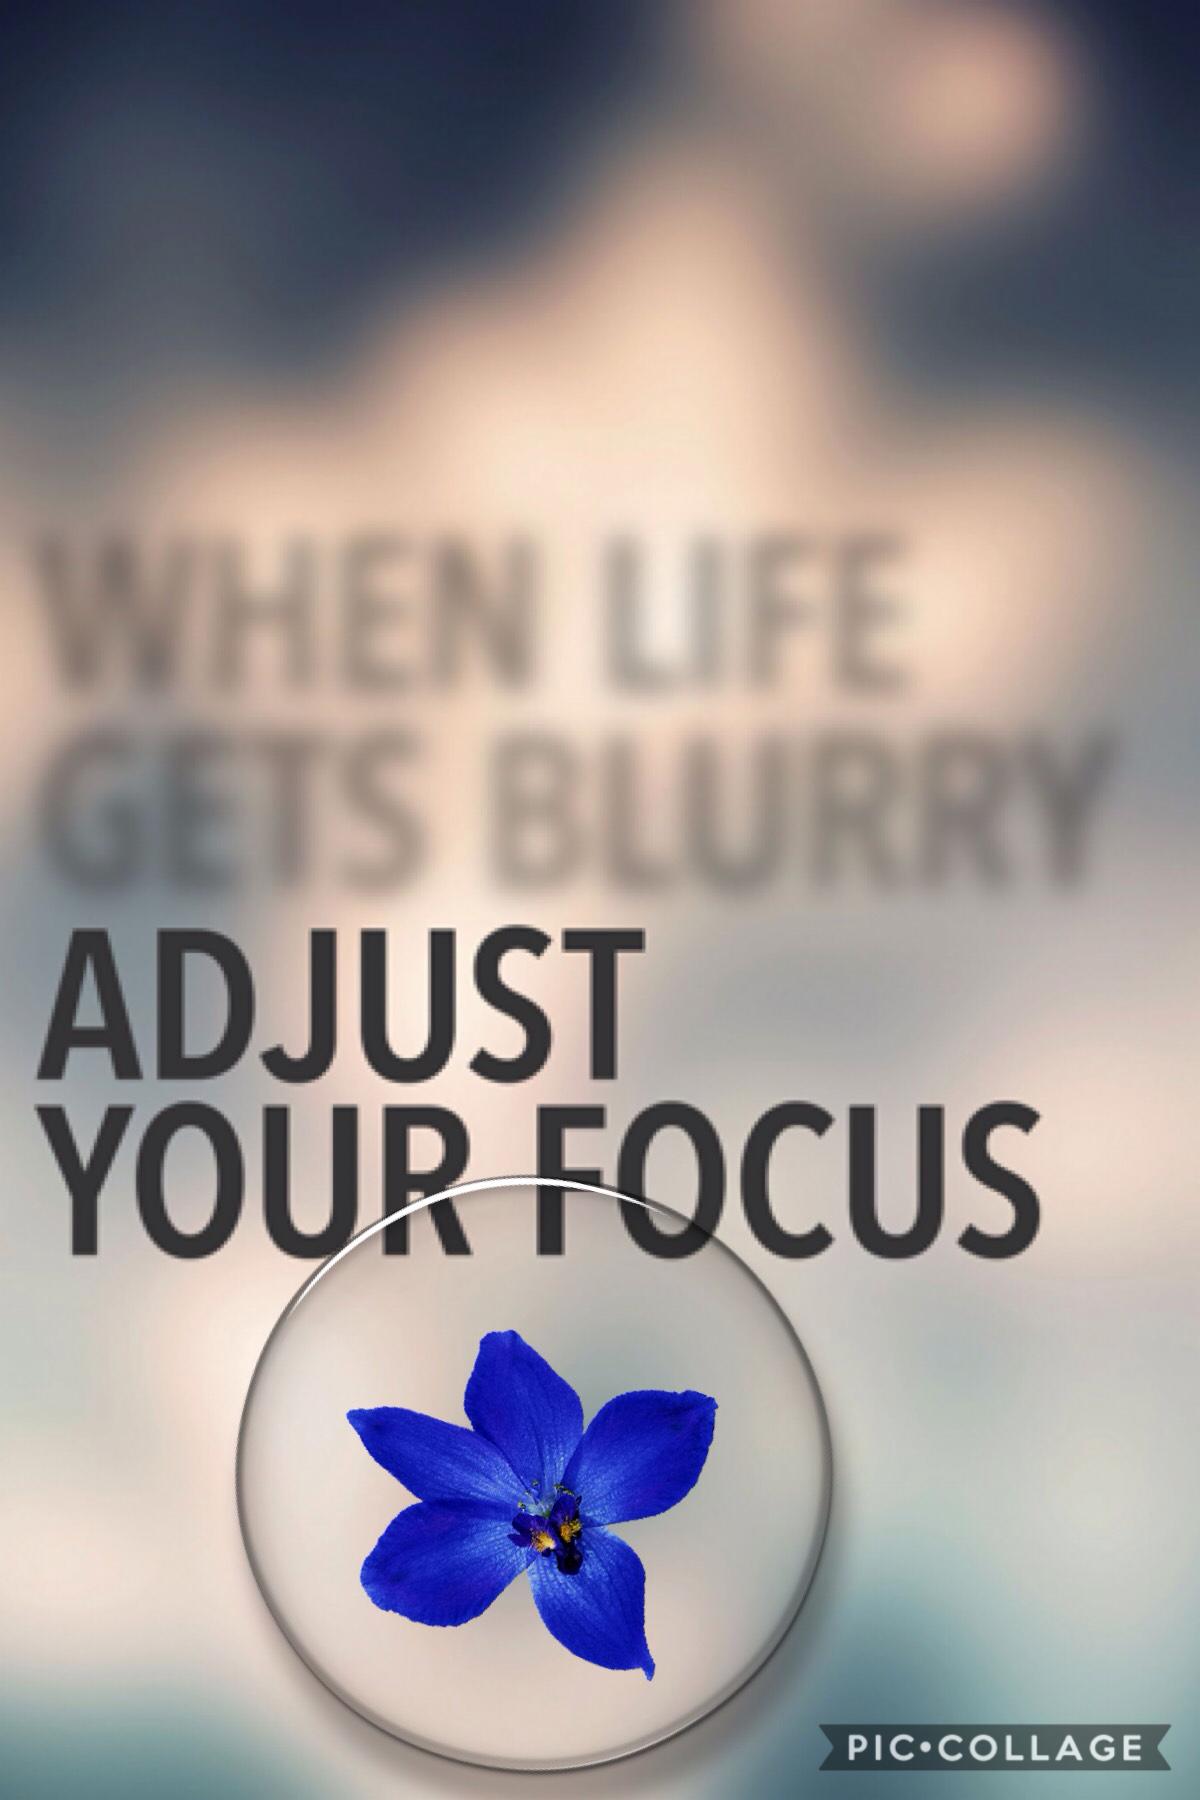 When life gets blurry just adjust your focus